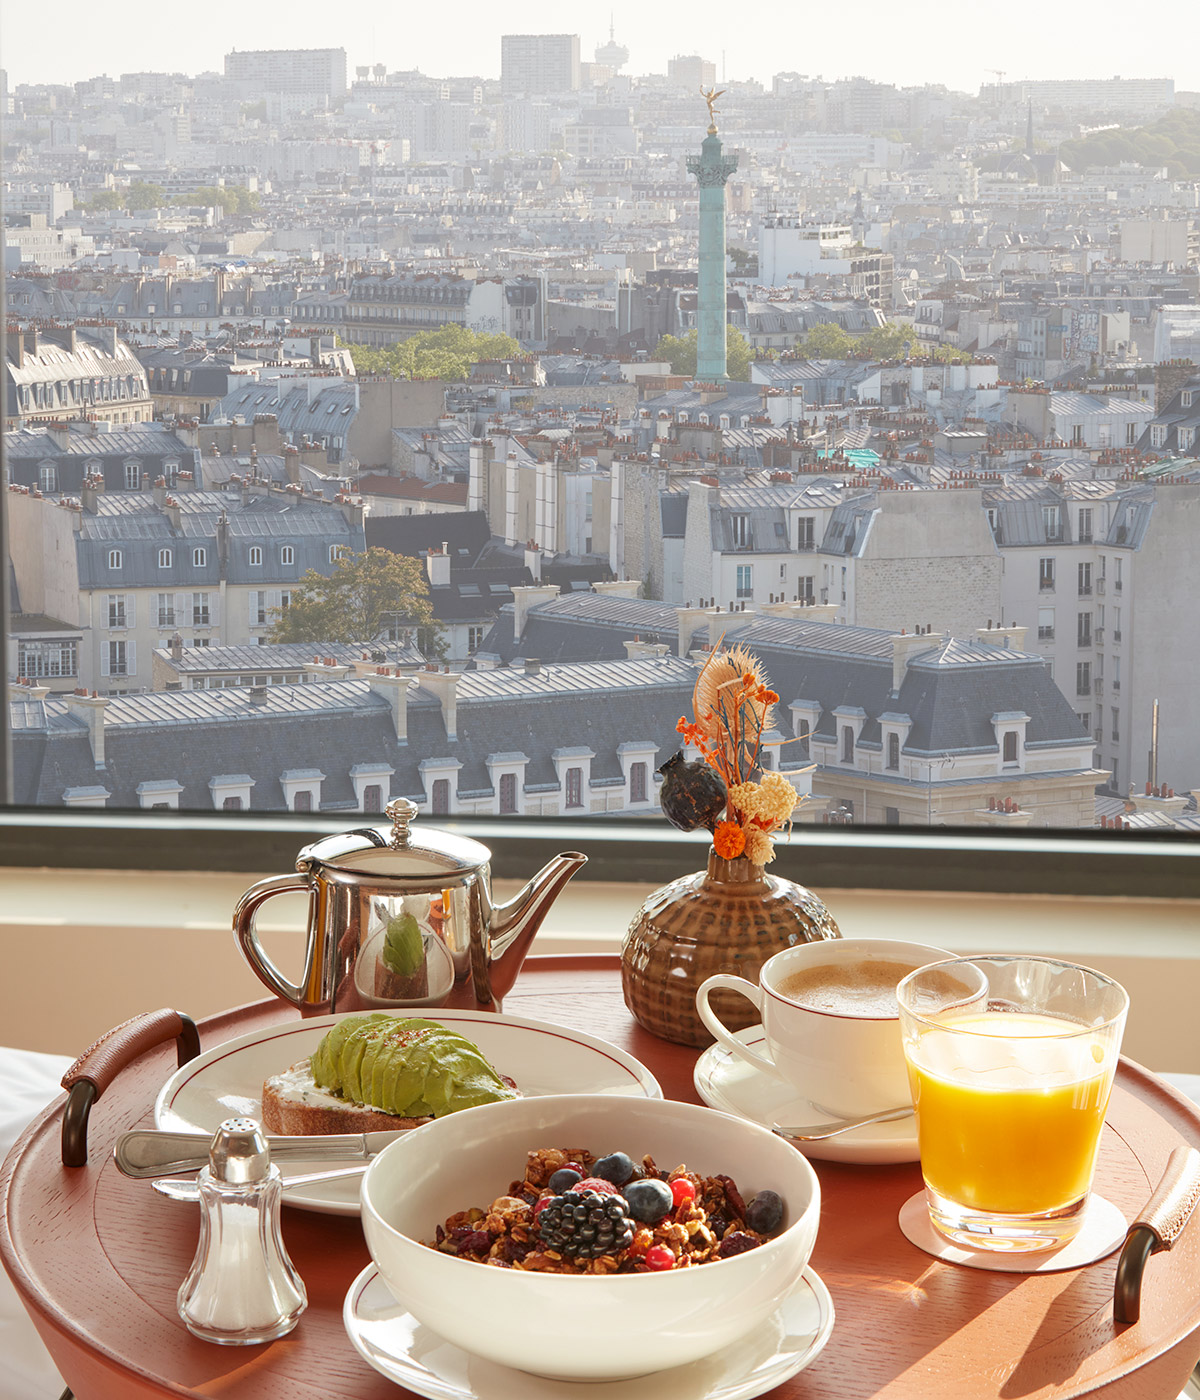 Breakfast tray on the balcony with a view over Paris.